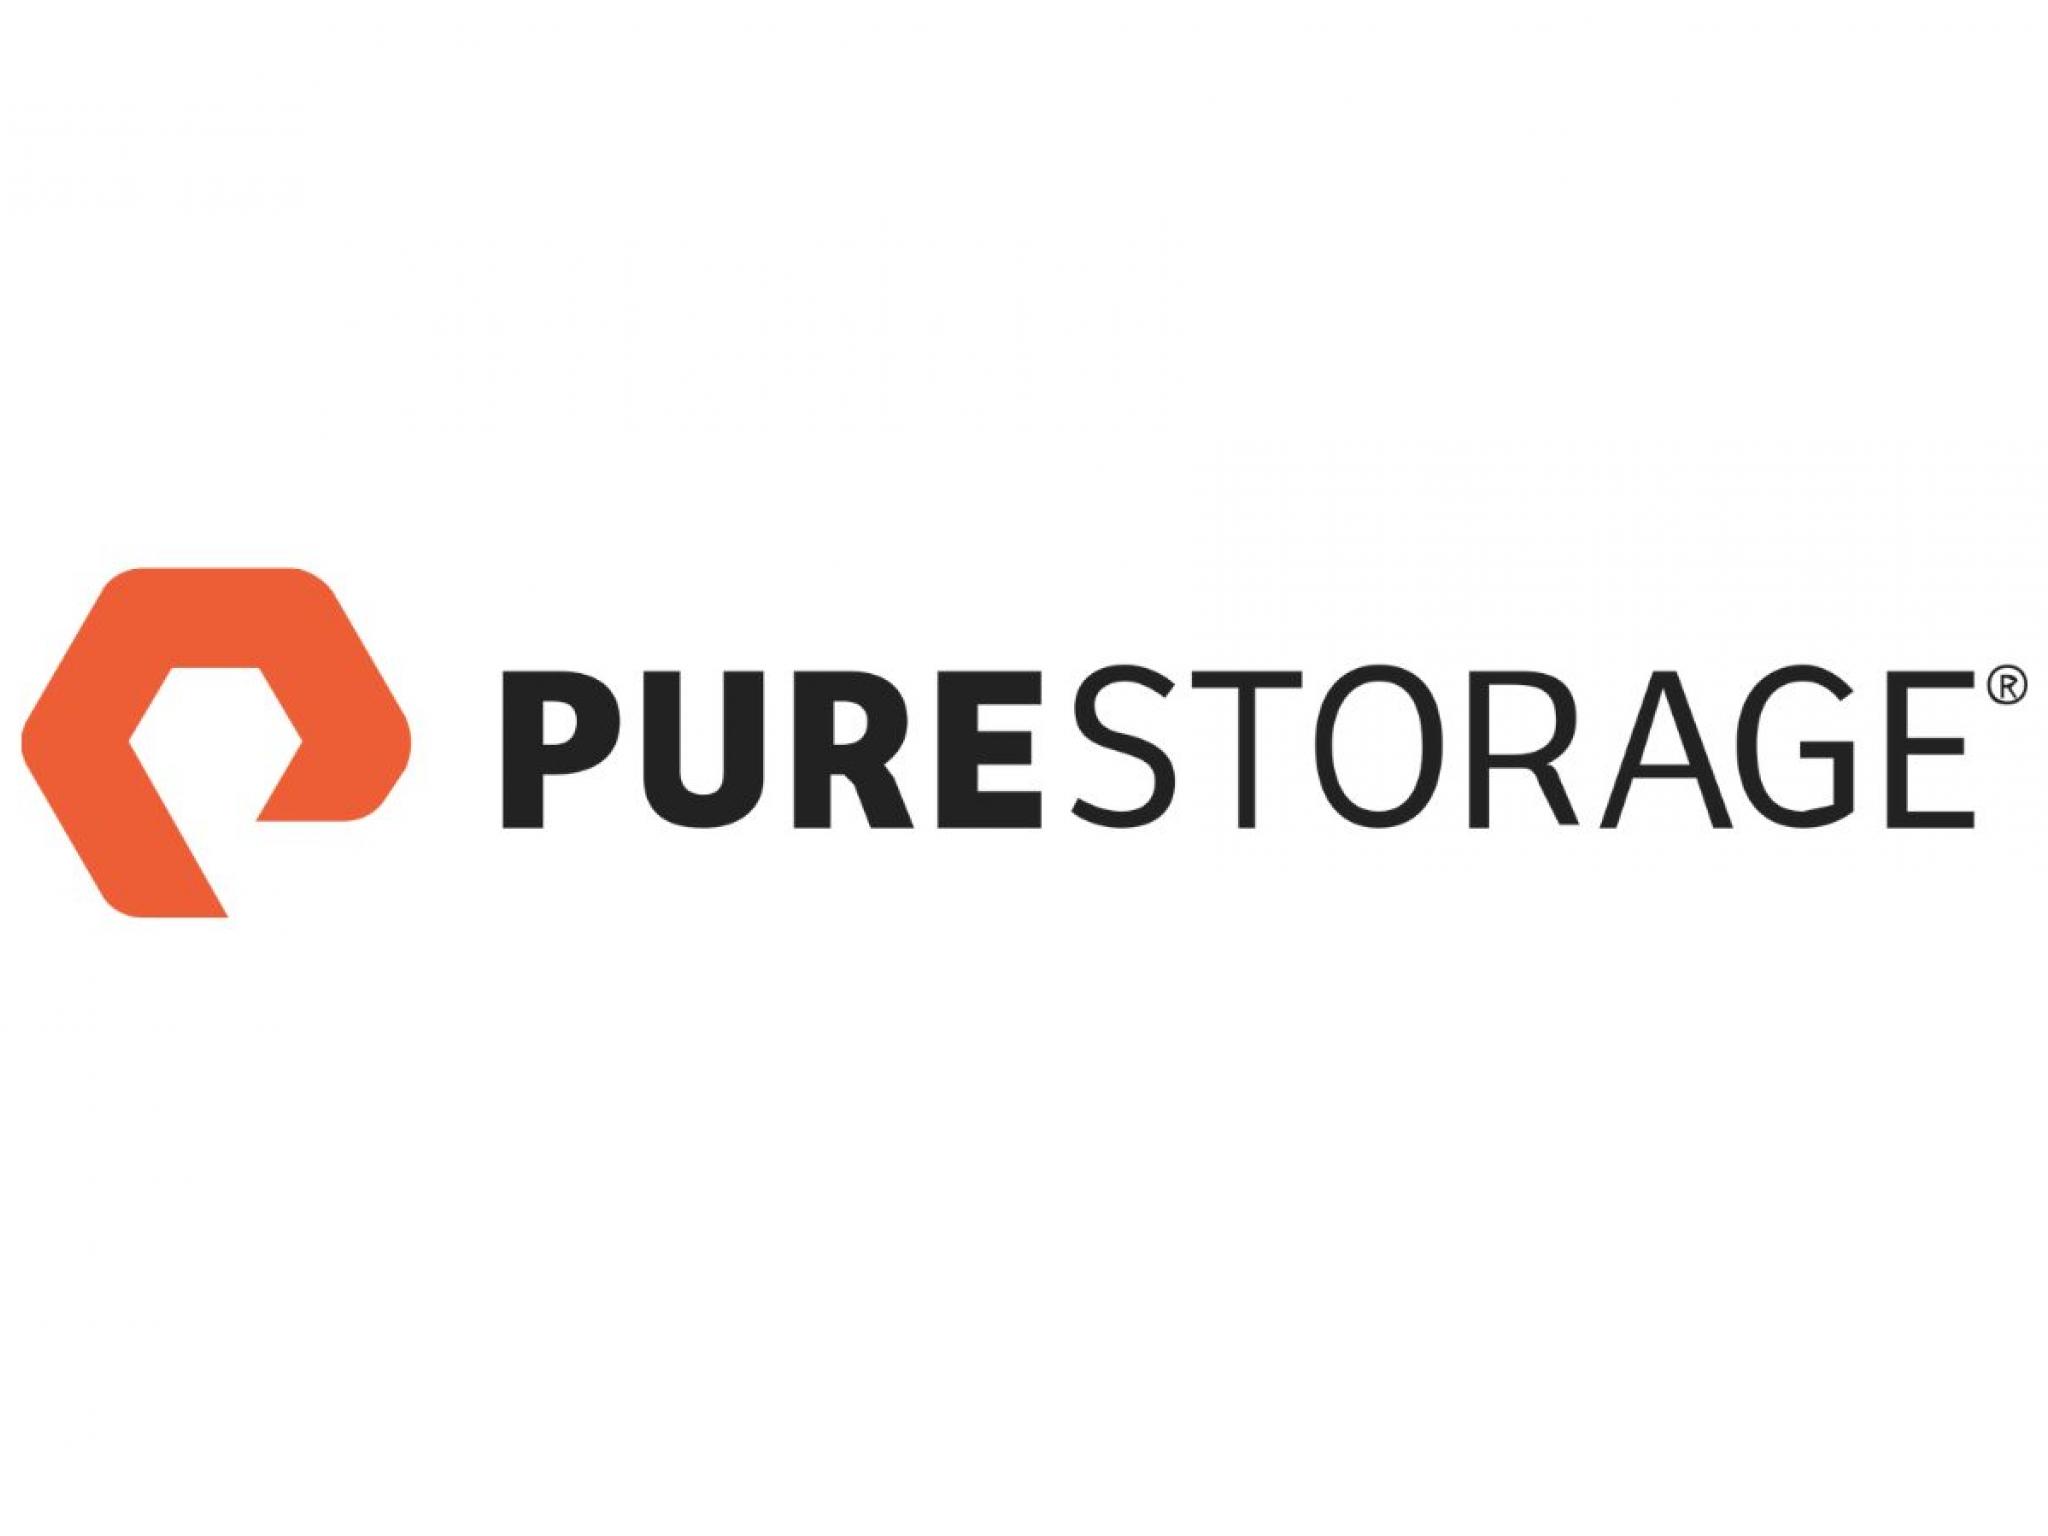  these-analysts-boost-their-forecasts-on-pure-storage-following-strong-q4-results 